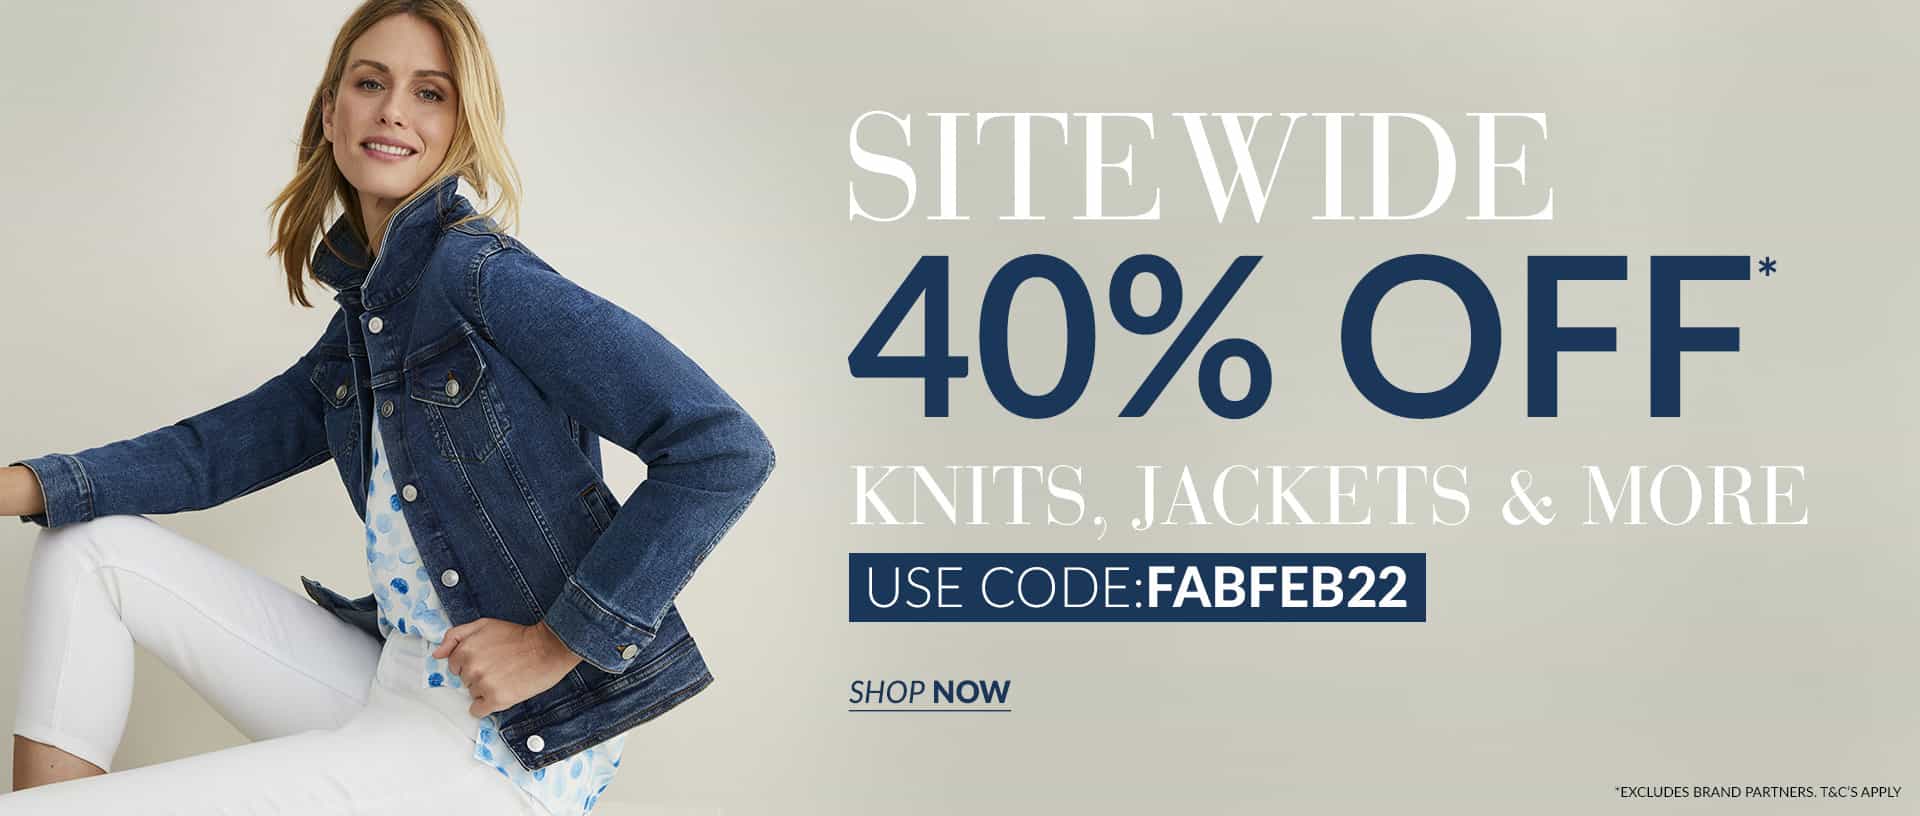 EziBuy extra 40% OFF sitewide with promo code + further 30% OFF outlet styles